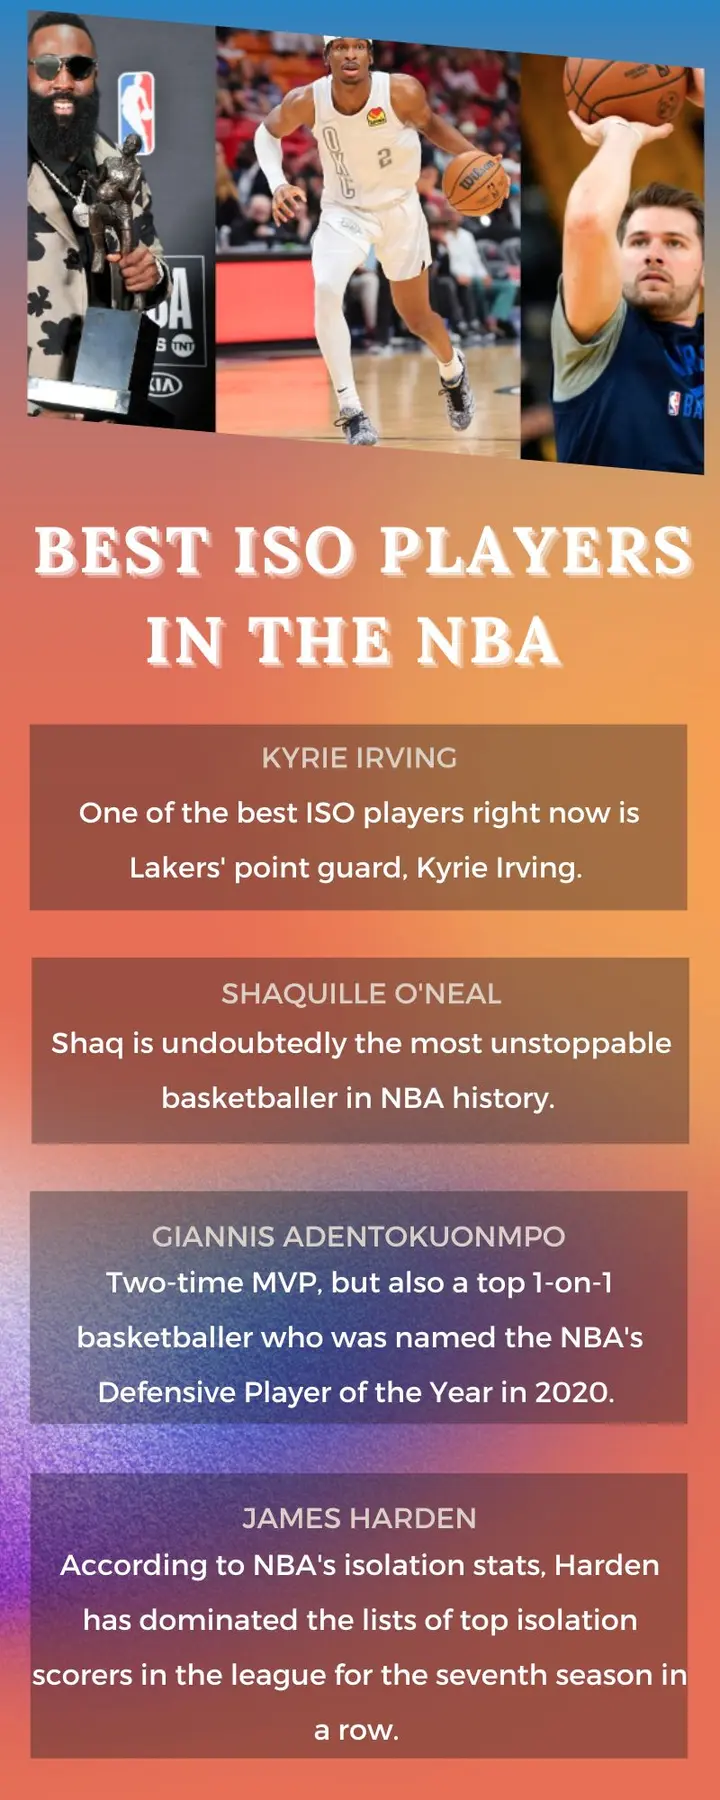 Best ISO players in the NBA currently